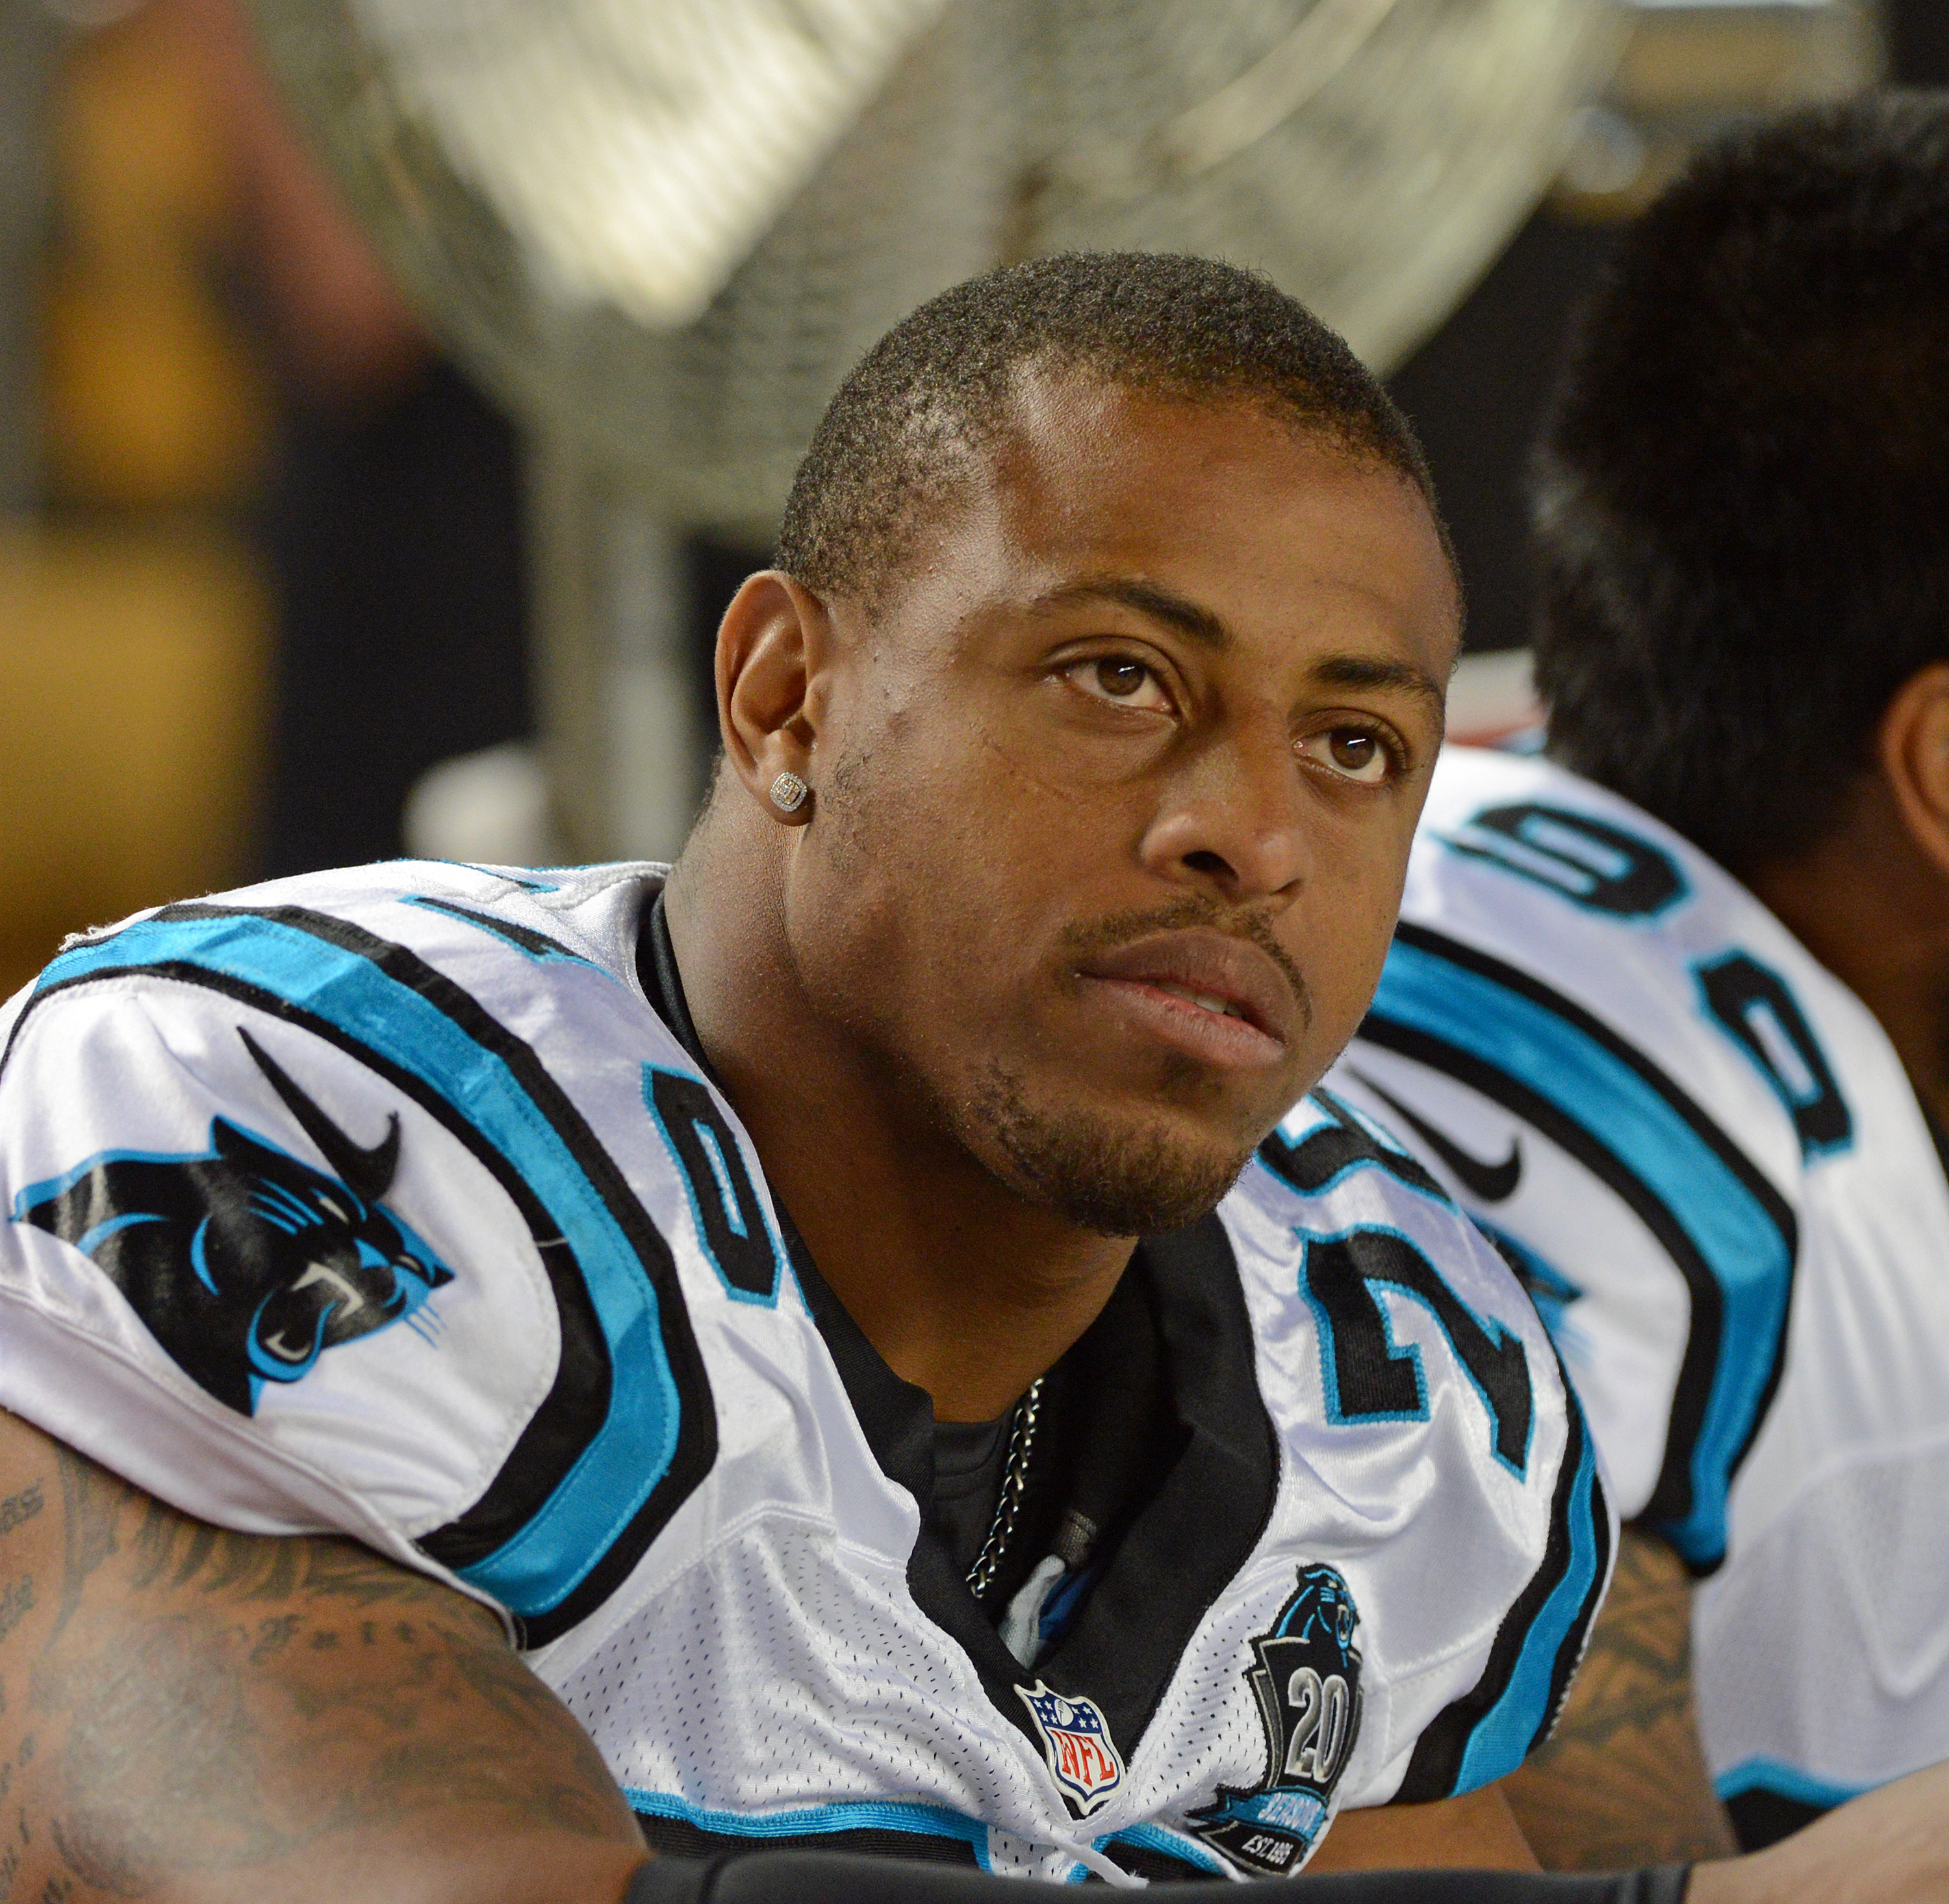 Defensive lineman Greg Hardy of the Carolina Panthers looks on from the sideline during a preseason game against the Pittsburgh Steelers at Heinz Field on Aug. 28, 2014 in Pittsburgh. (George Gojkovich—Getty Images)